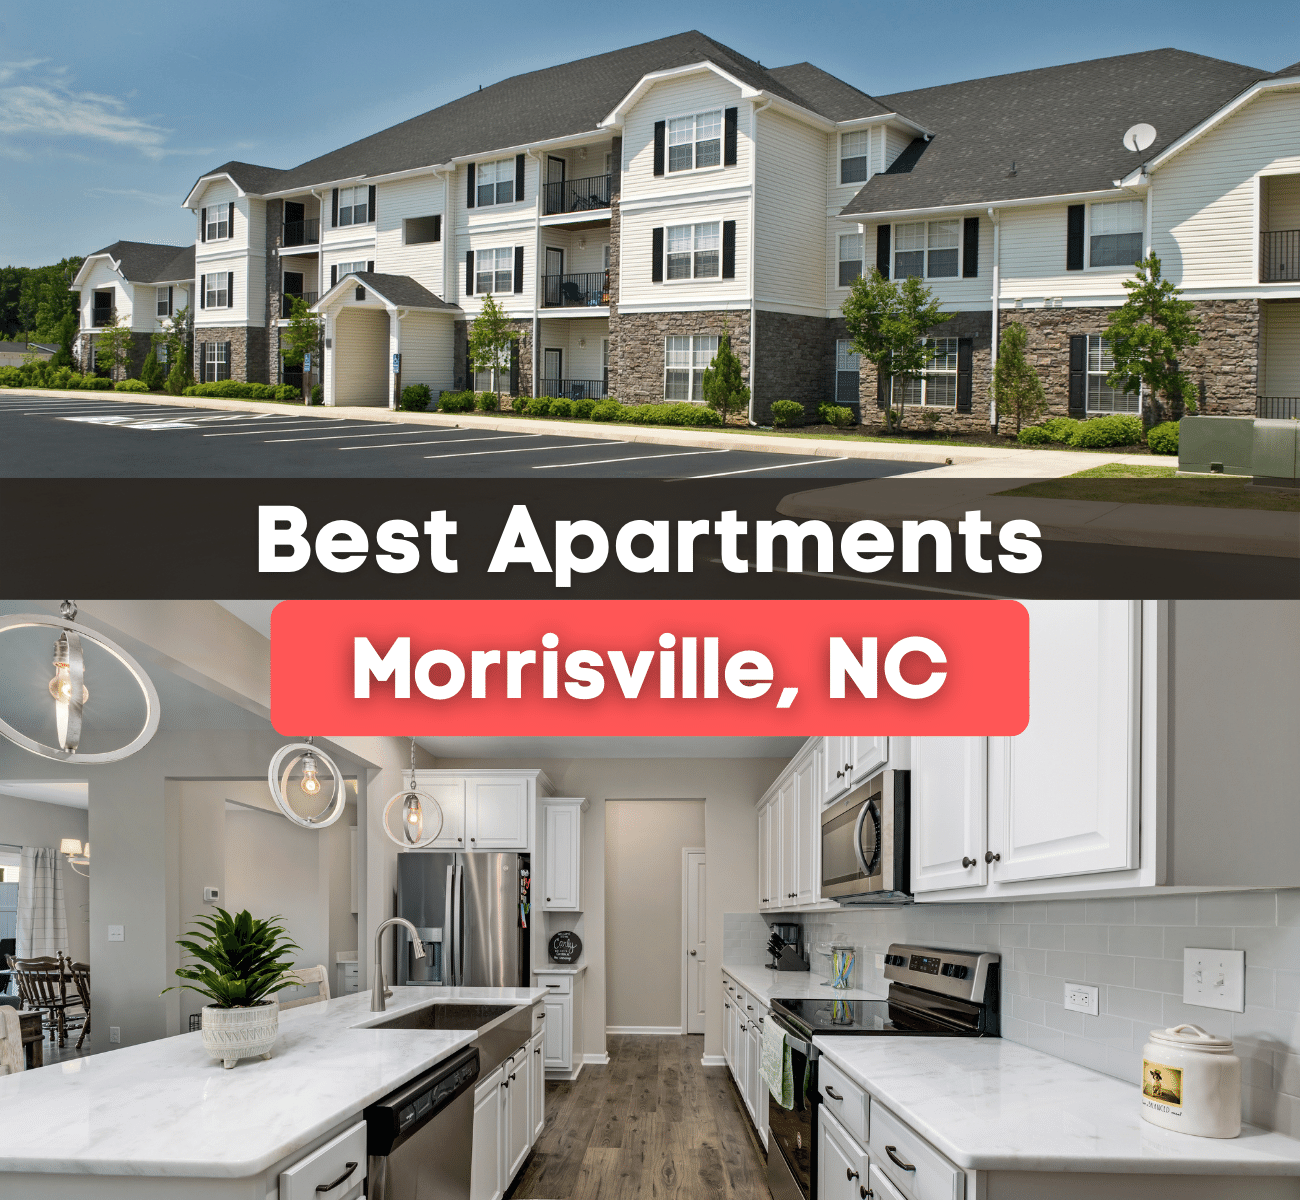 Morrisville, NC apartment complex and apartment kitchen